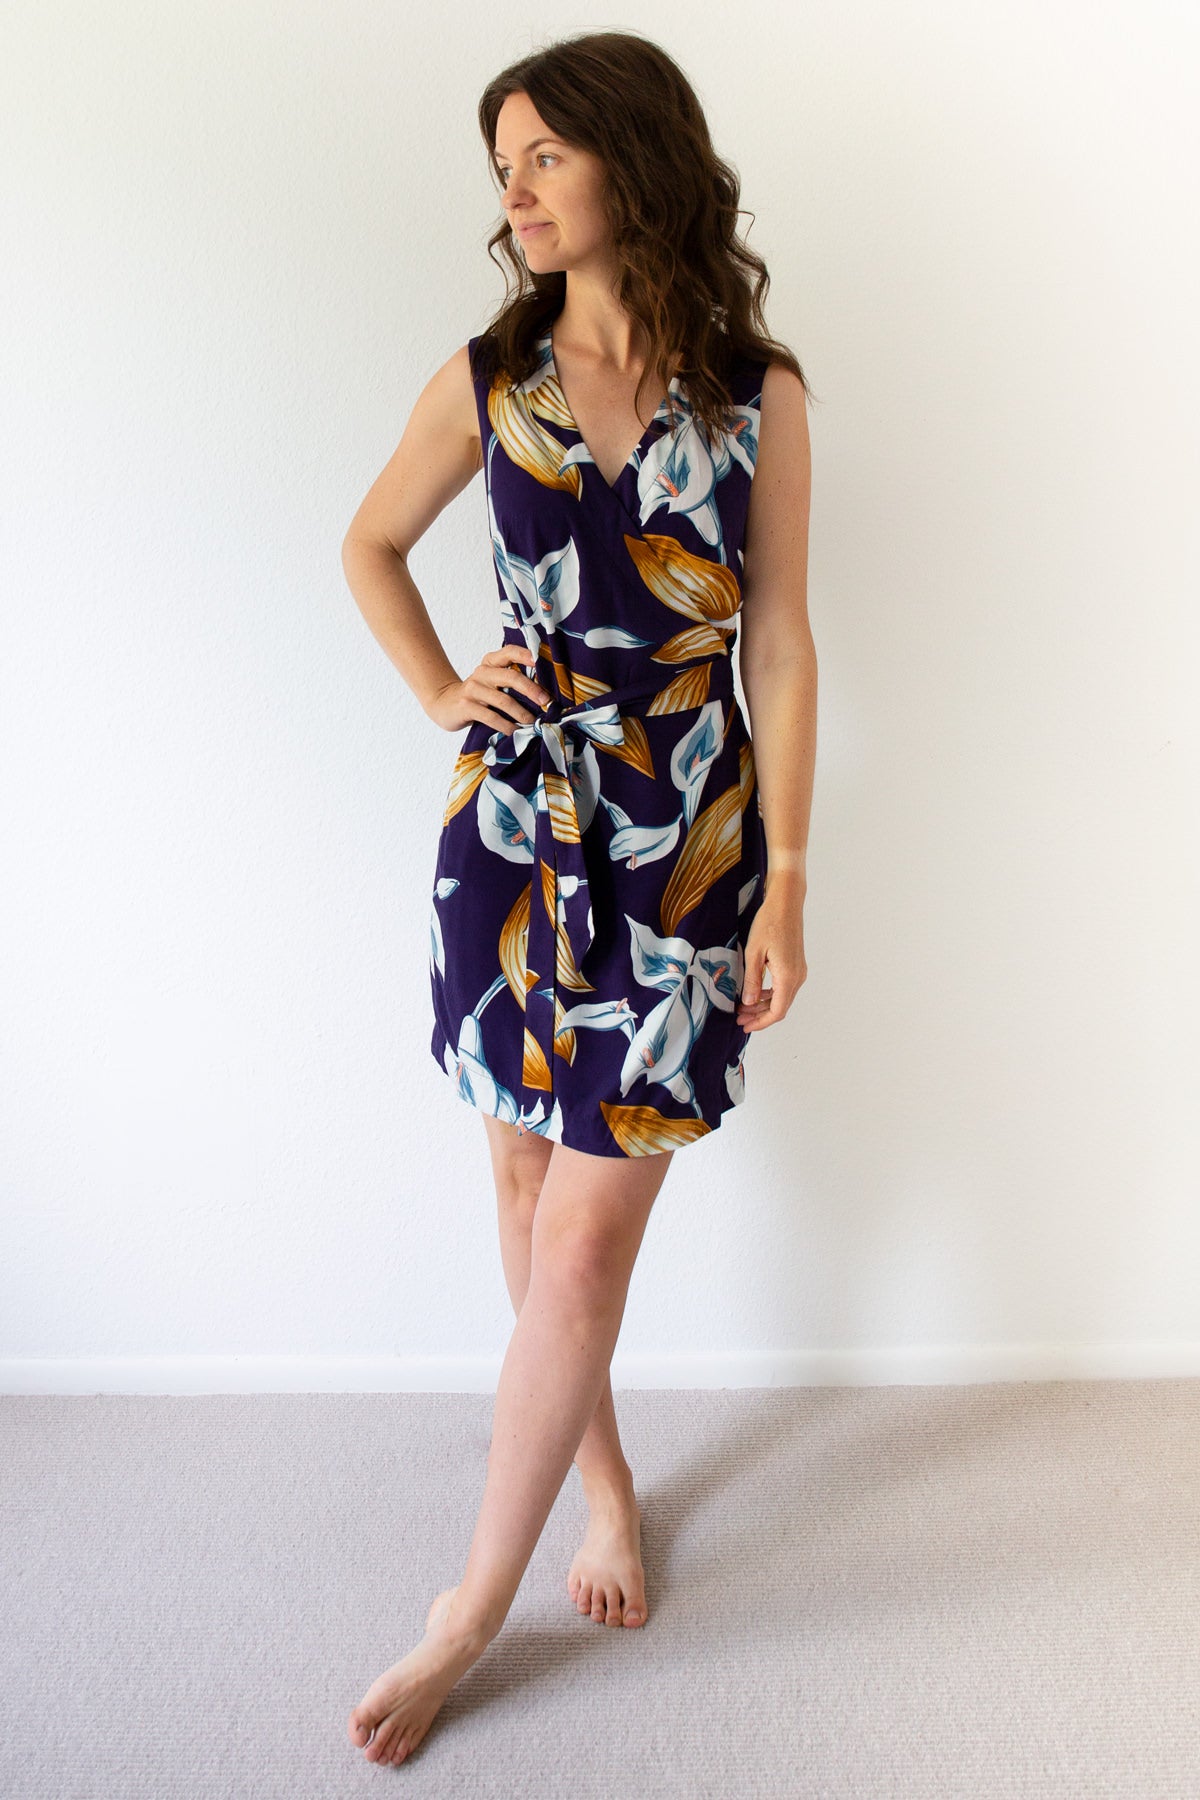 How to Shorten the Highlands Wrap Dress by Allie Olson